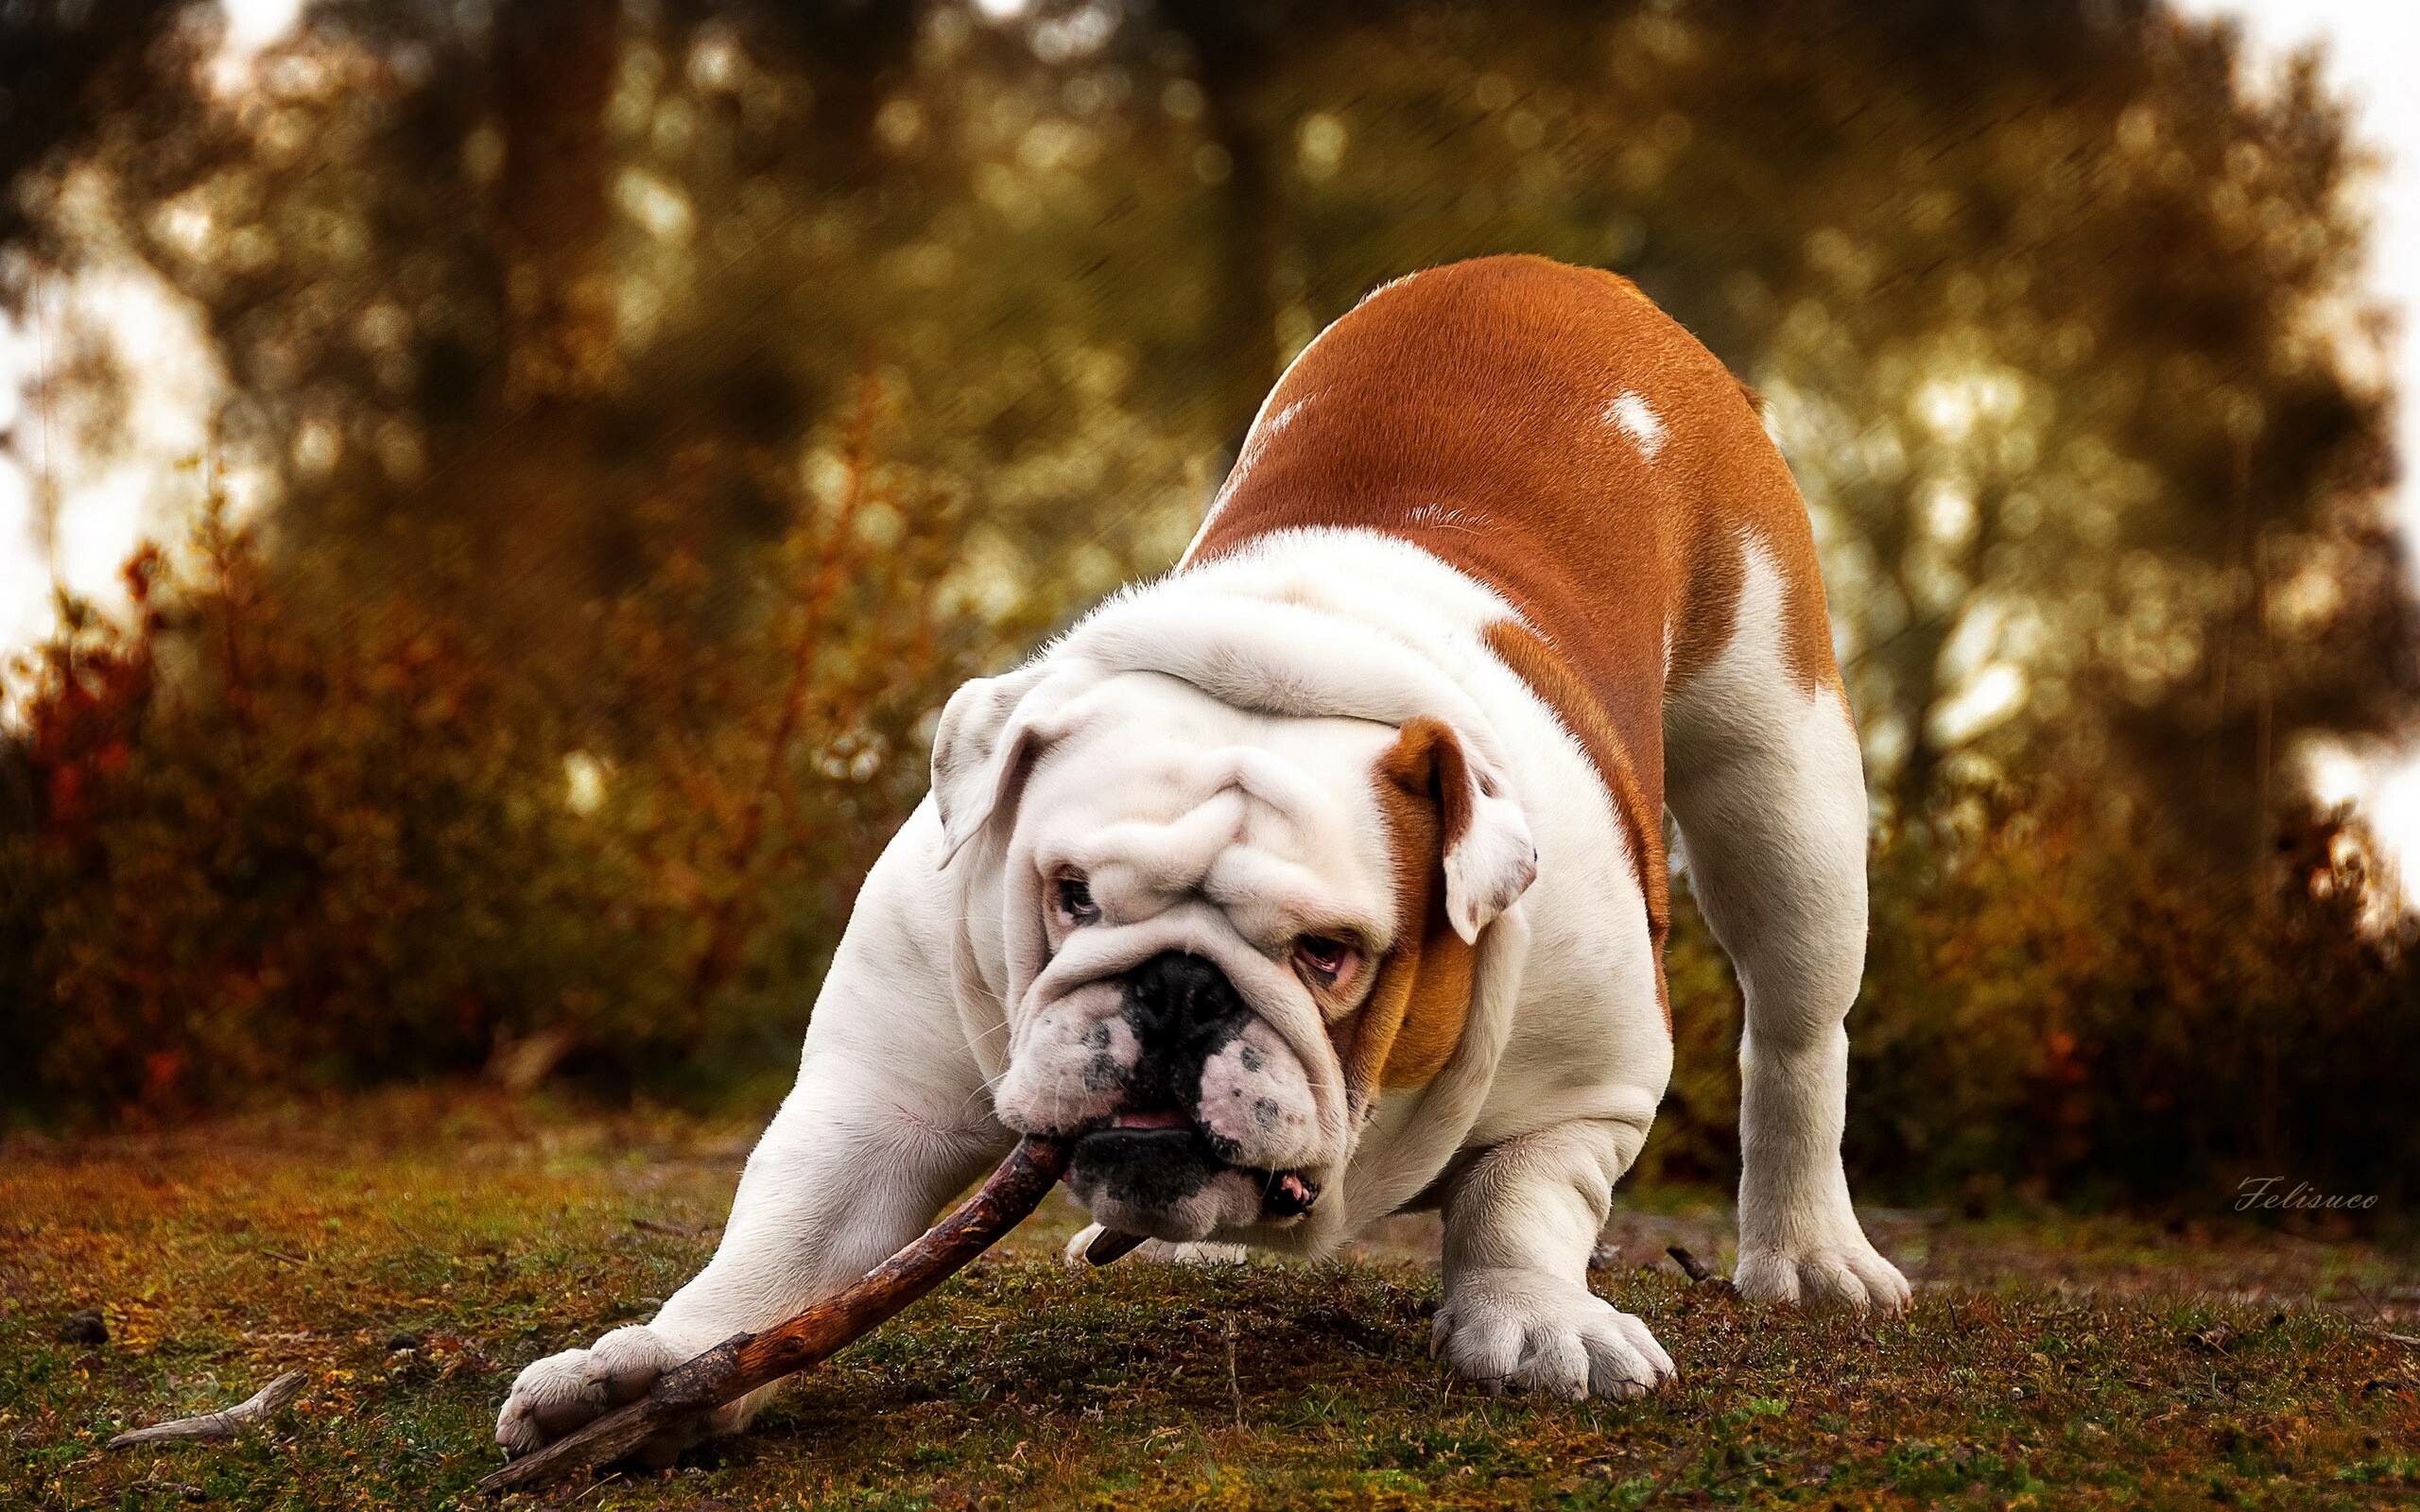 Bulldog: English breed, One of the few breeds whose tail is naturally short and either straight, screwed or thin. 2560x1600 HD Wallpaper.